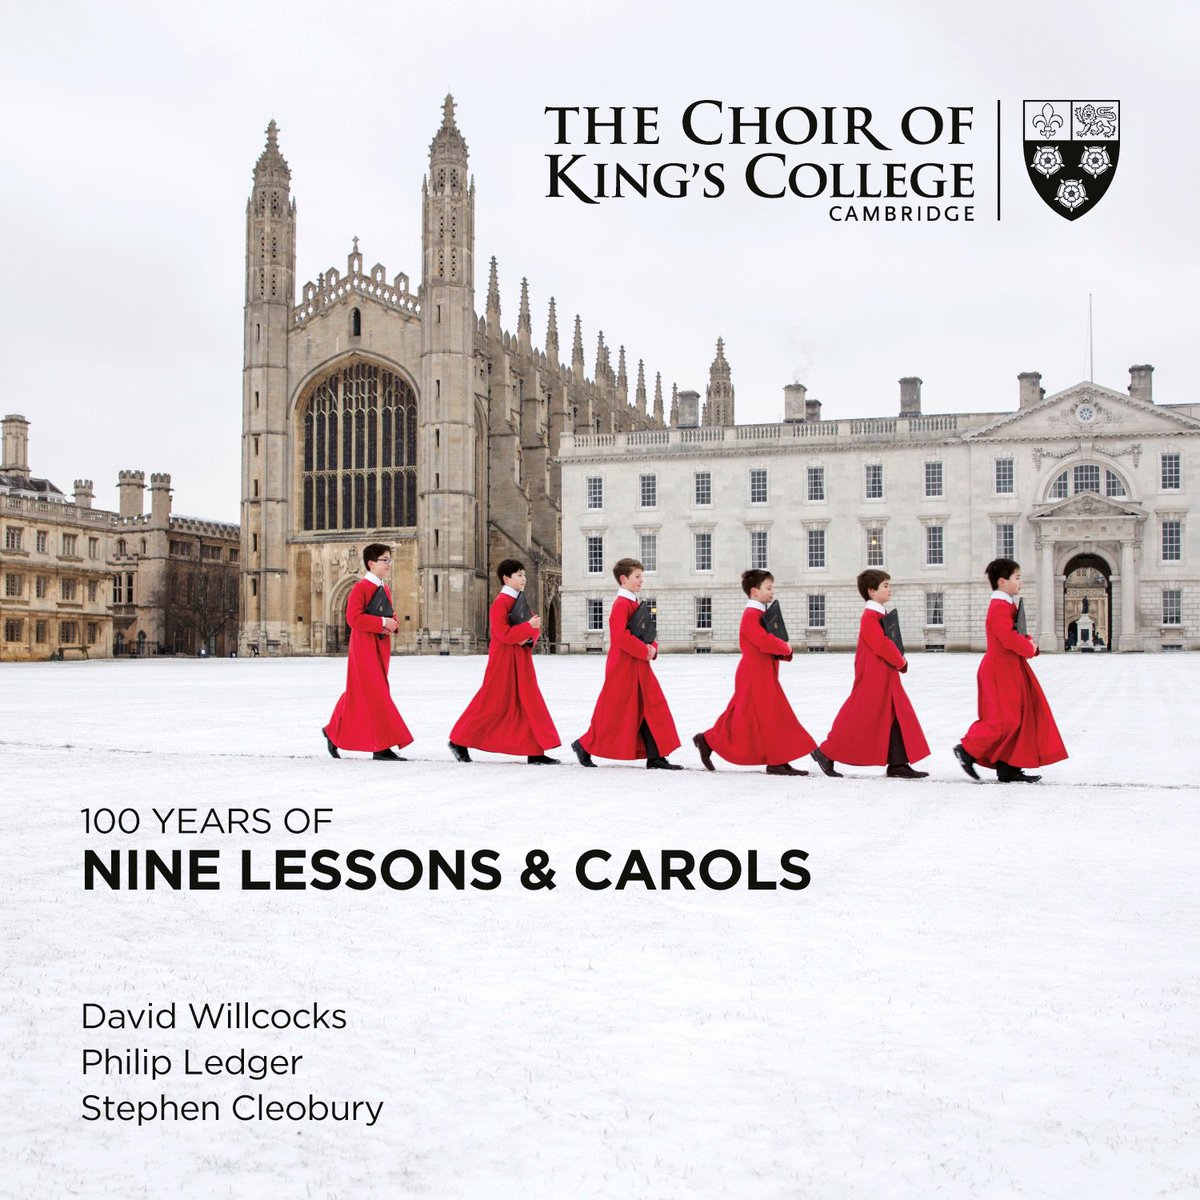 This album is spending its ninth week at #1 in the UK’s all-classical charts, the longest period of time any album has been there since 2011. Thank you to everyone who bought one and by doing so supported our future recordings! bit.ly/gr8xmas